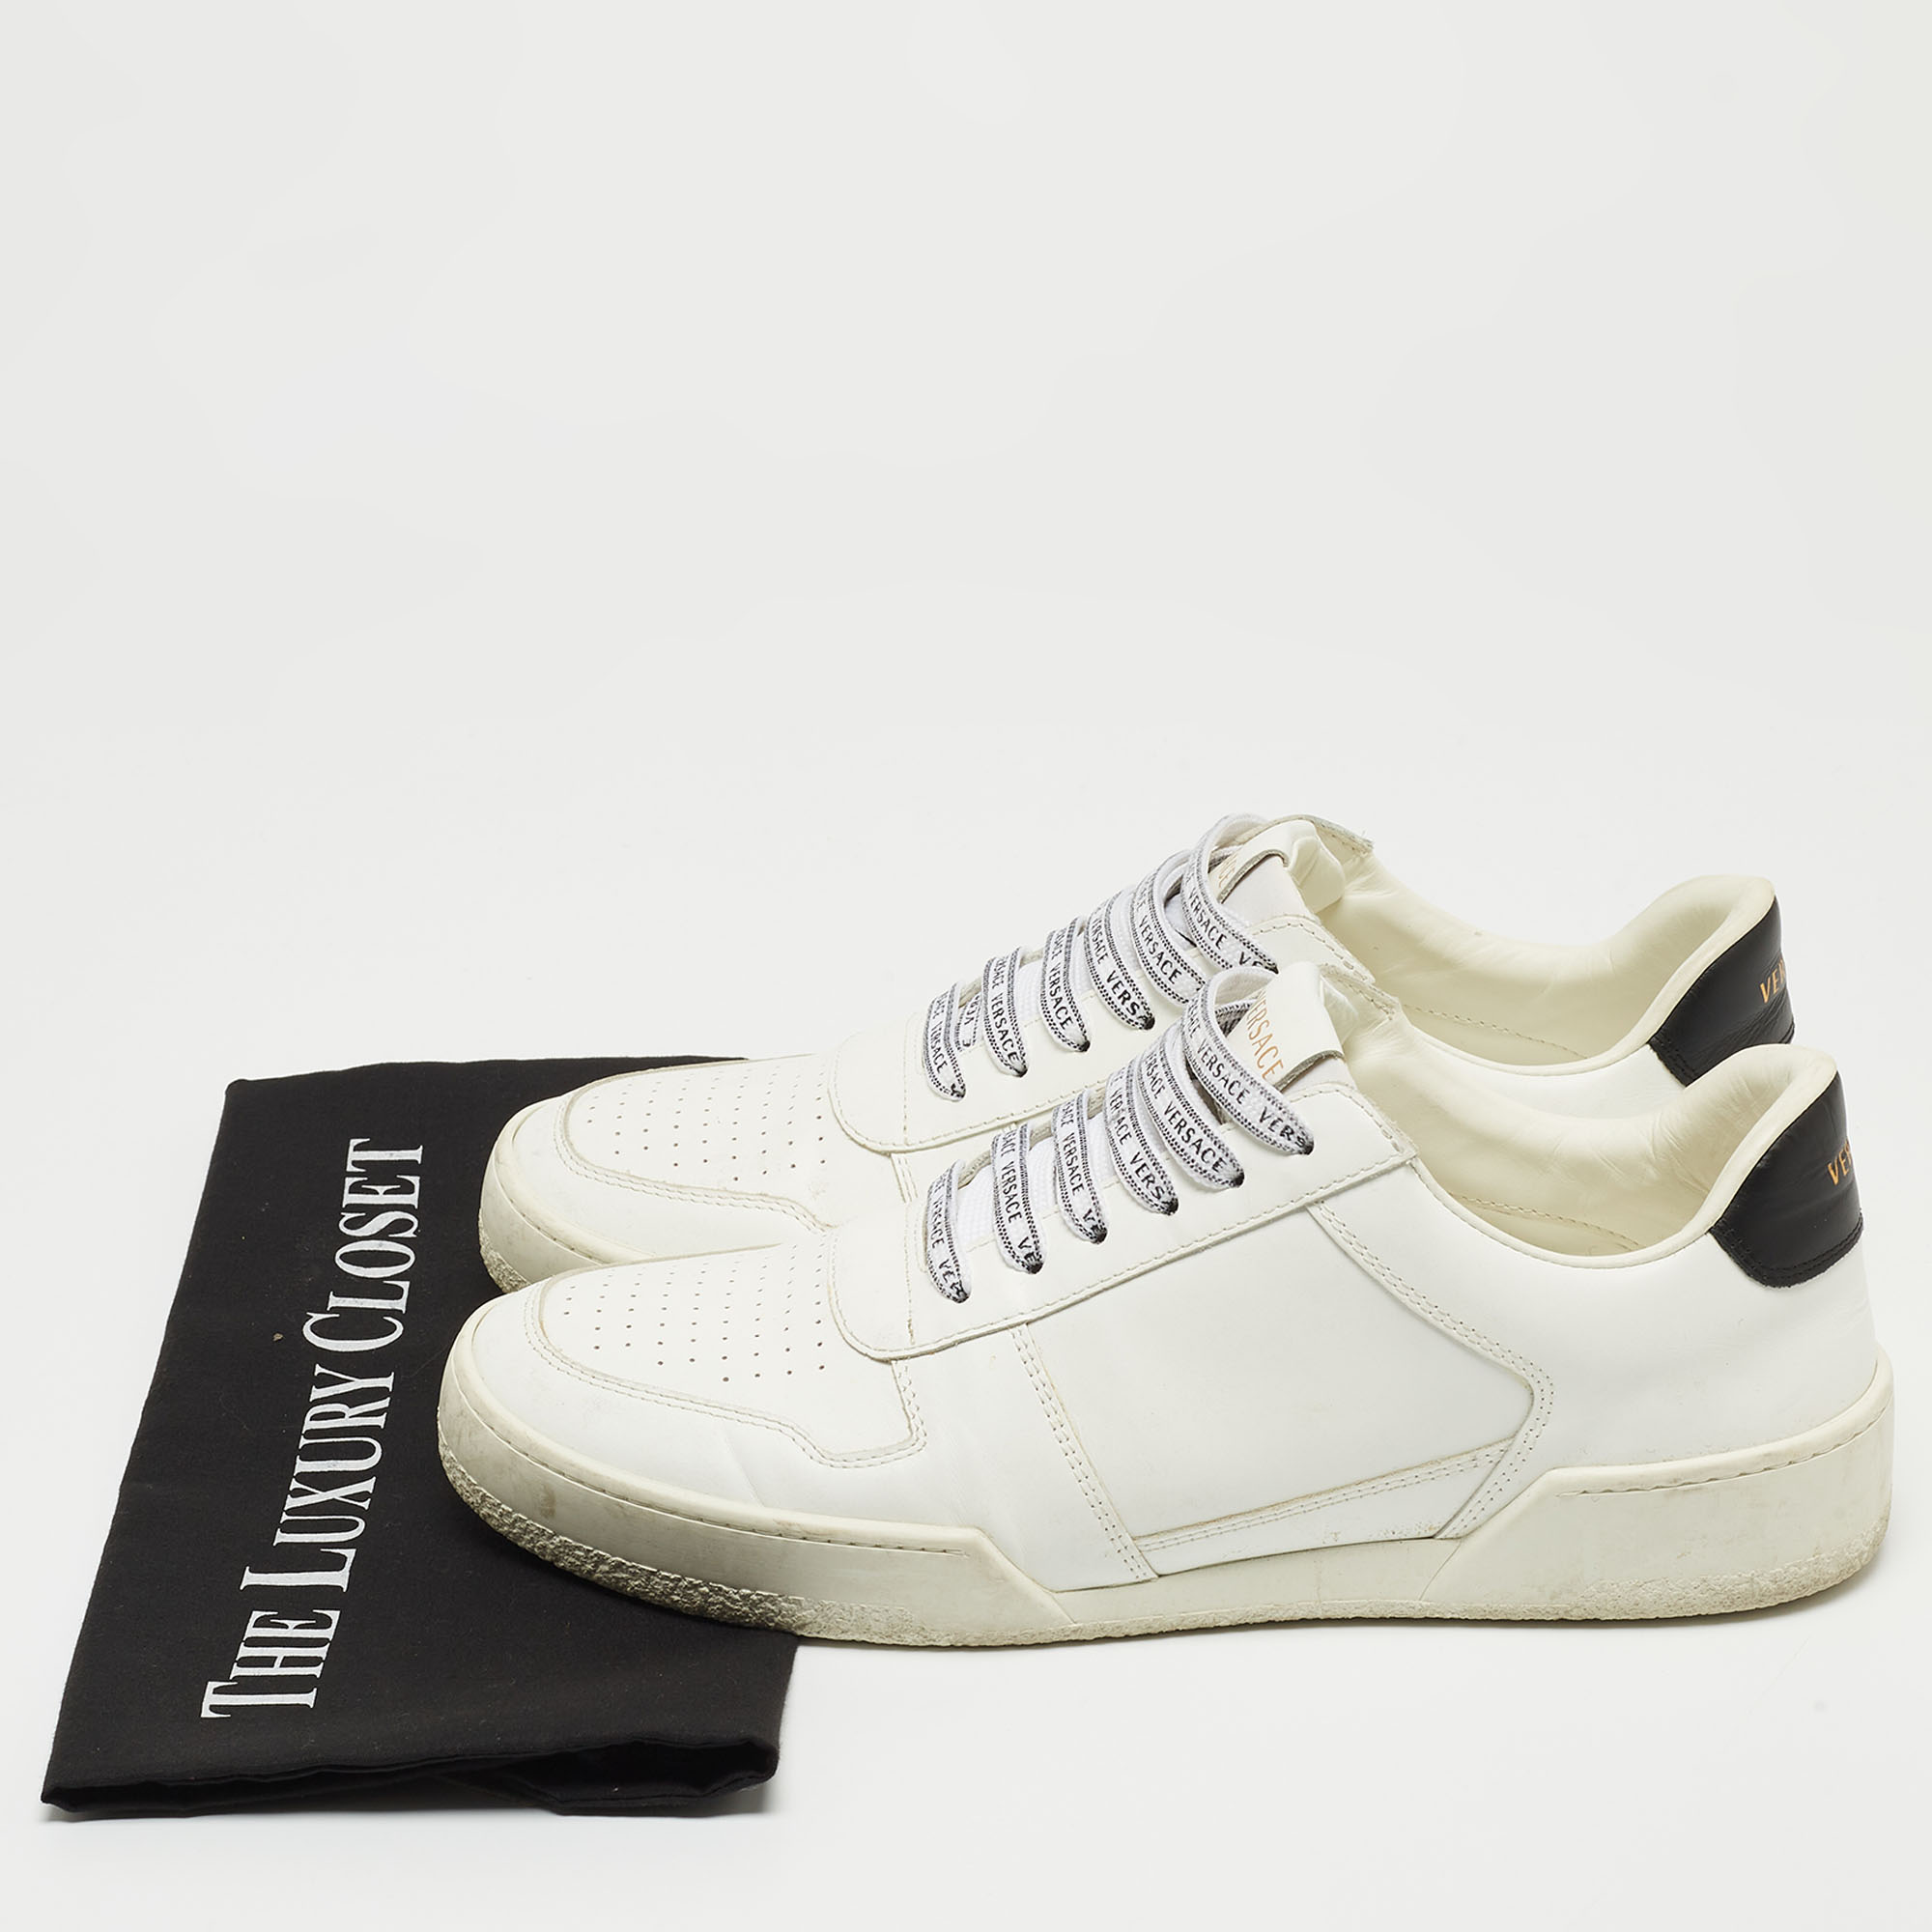 Versace White Leather Ilus Sneakers Size 42